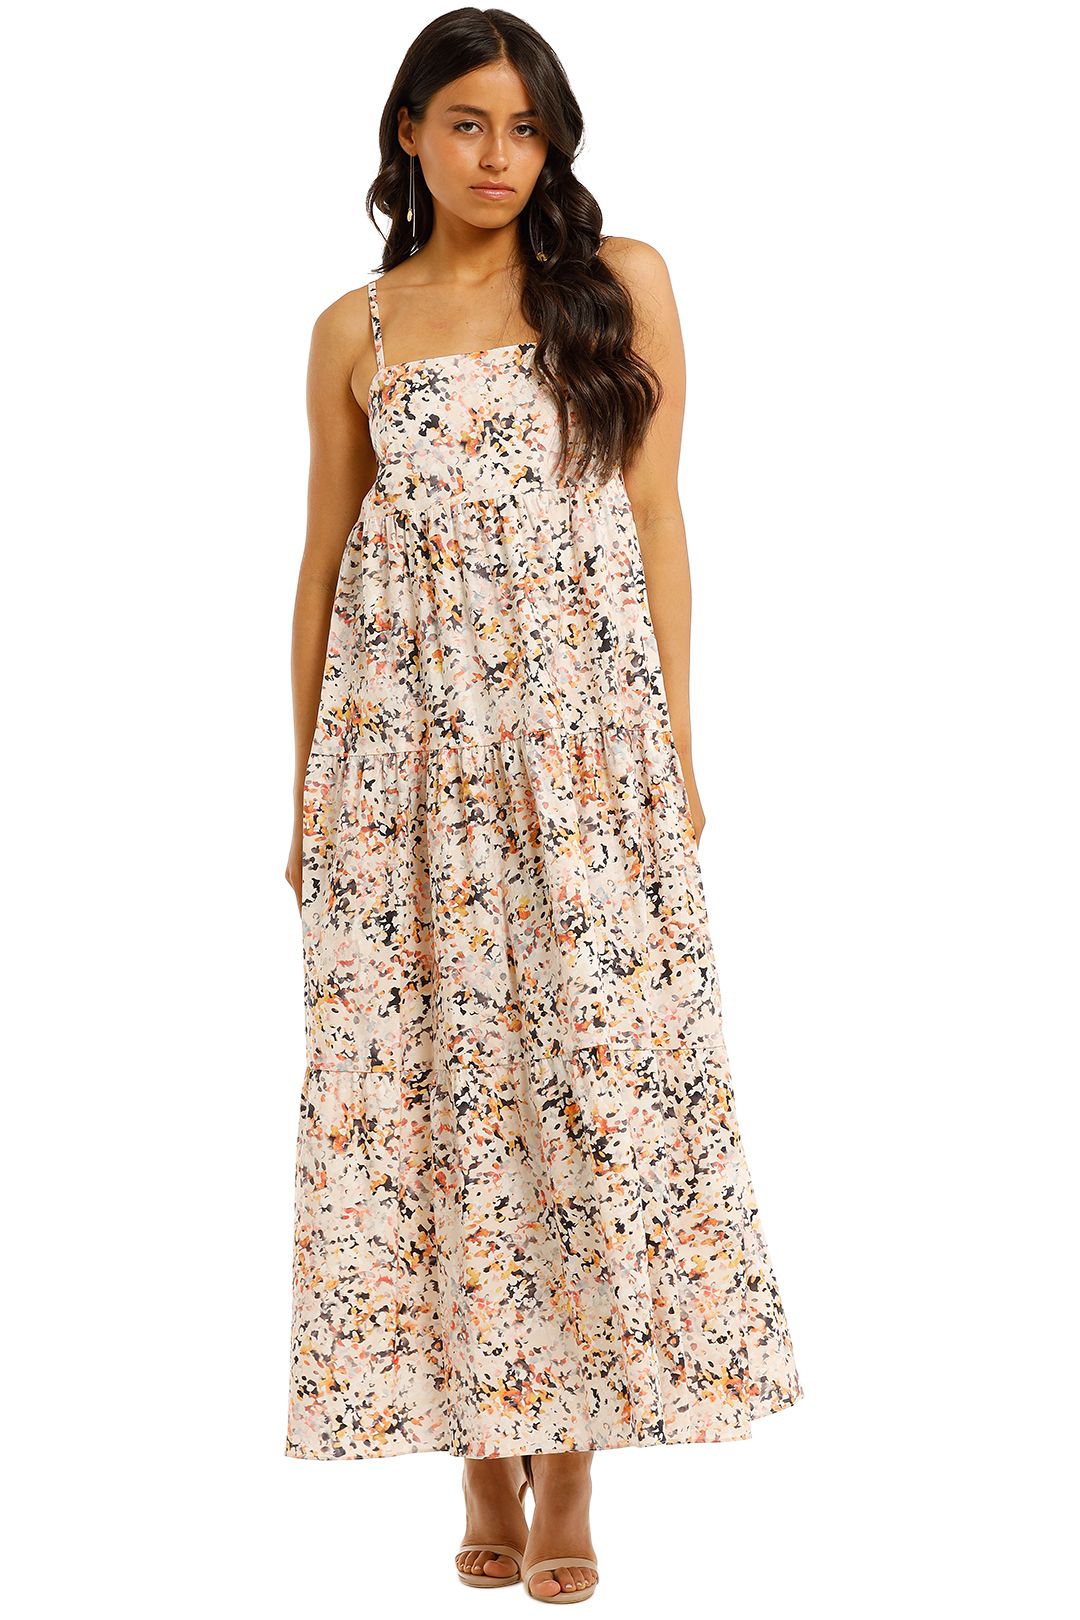 Witchery-Printed-Sundress-Syrup-Tort-Front